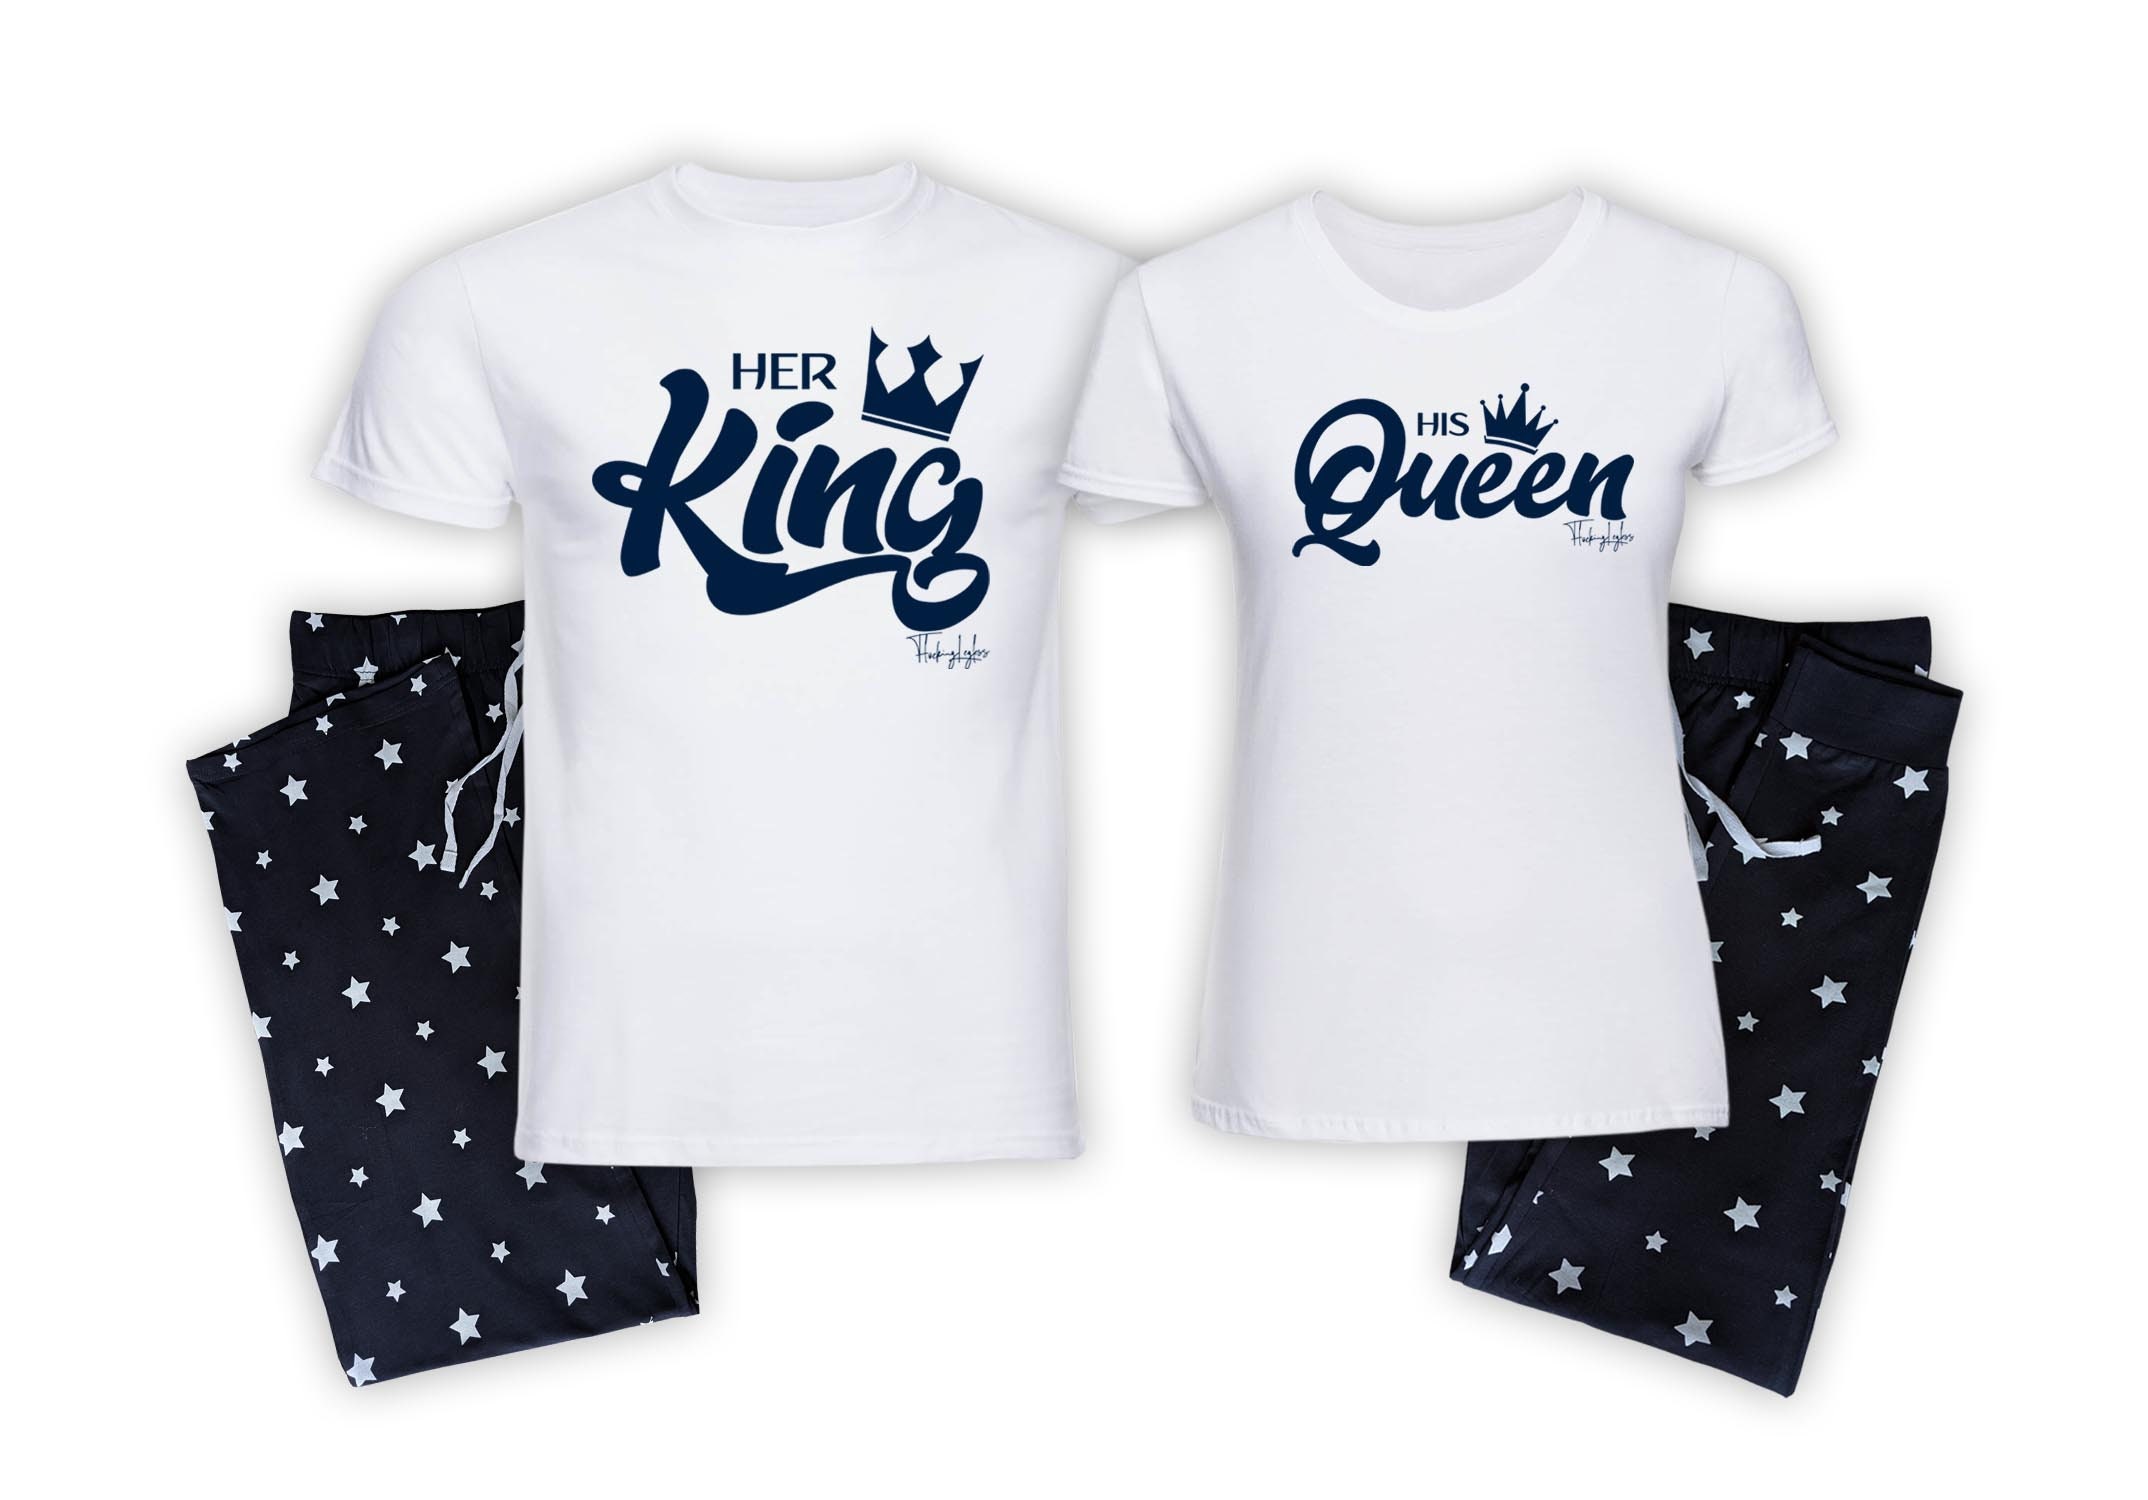 Asda Is Now Selling Matching Royal-themed Pyjamas For The Whole